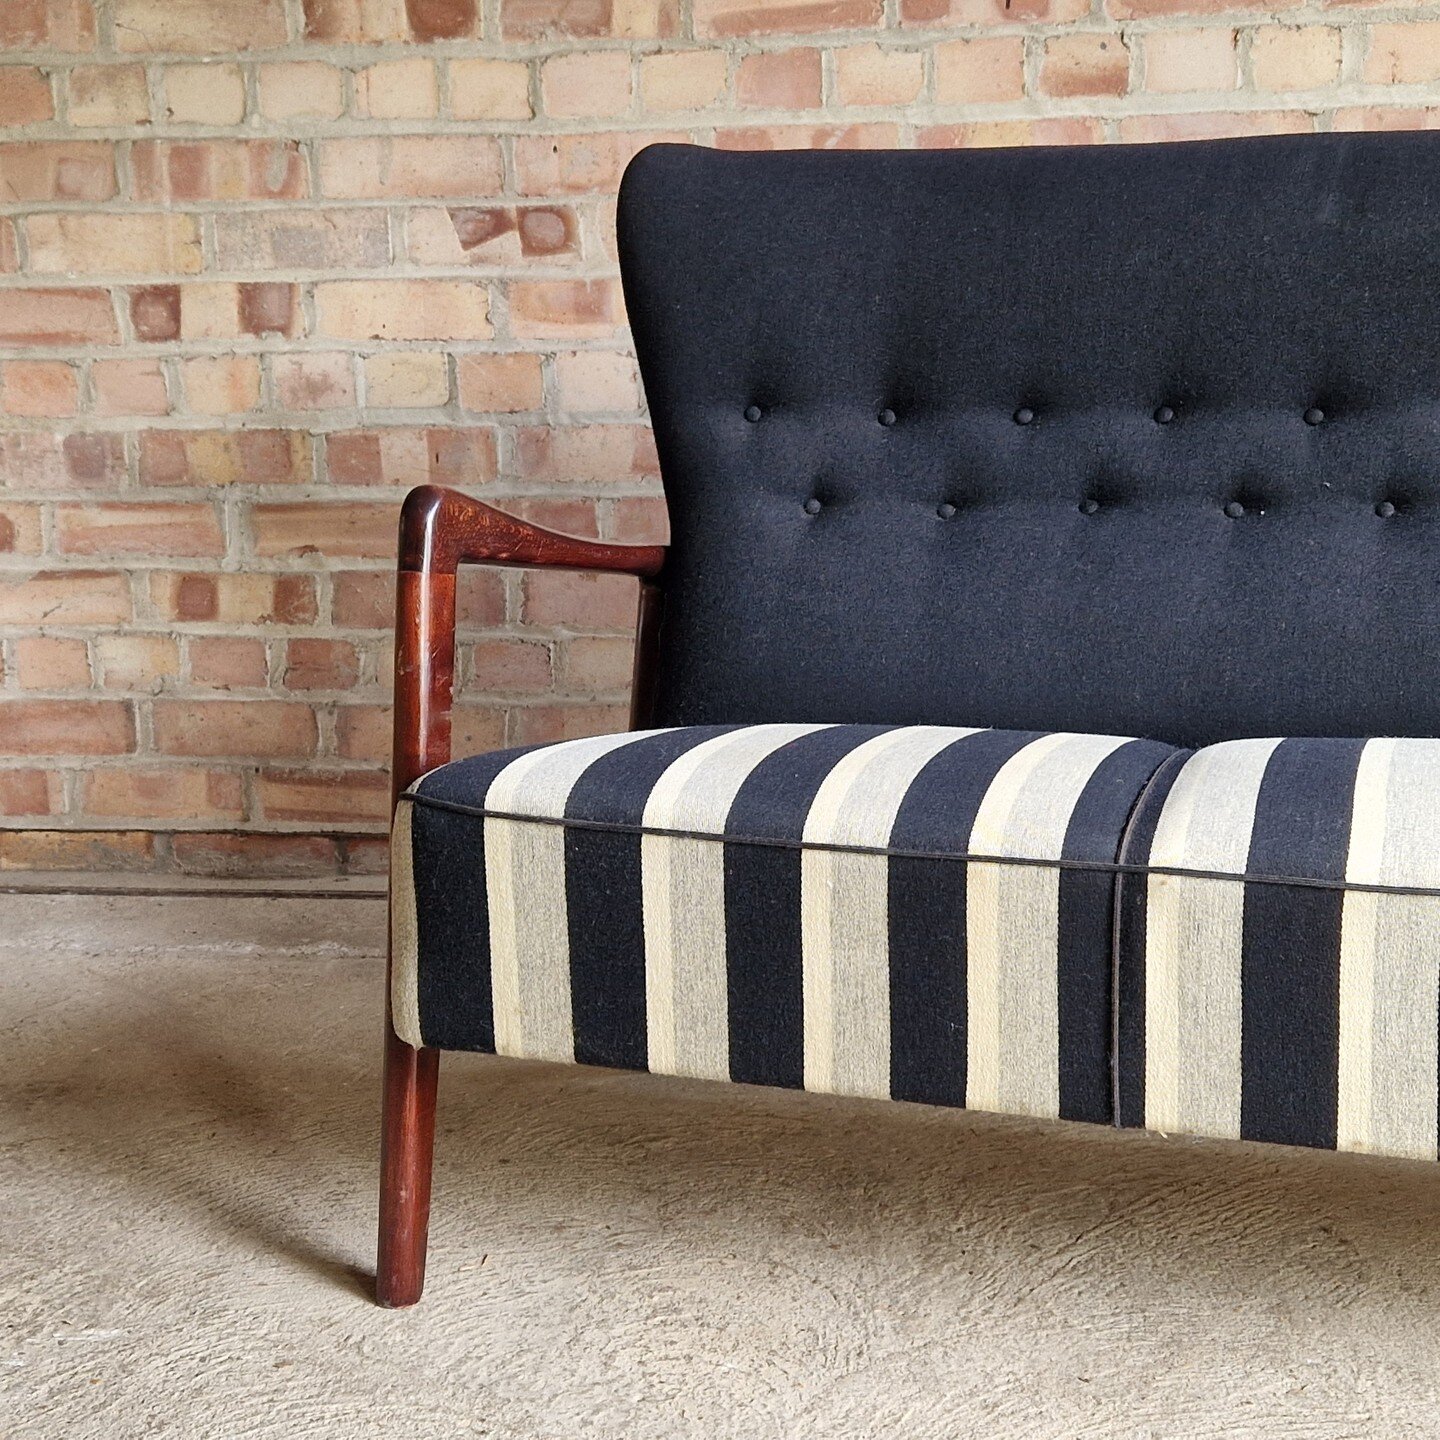 A 1940s high-back sofa by Fritz Hansen, showcasing exposed wooden arms. The seat and back feature button detailing for added elegance.

This exquisite piece features a striking interplay of navy blue and white line wool on its seat, creating a captiv